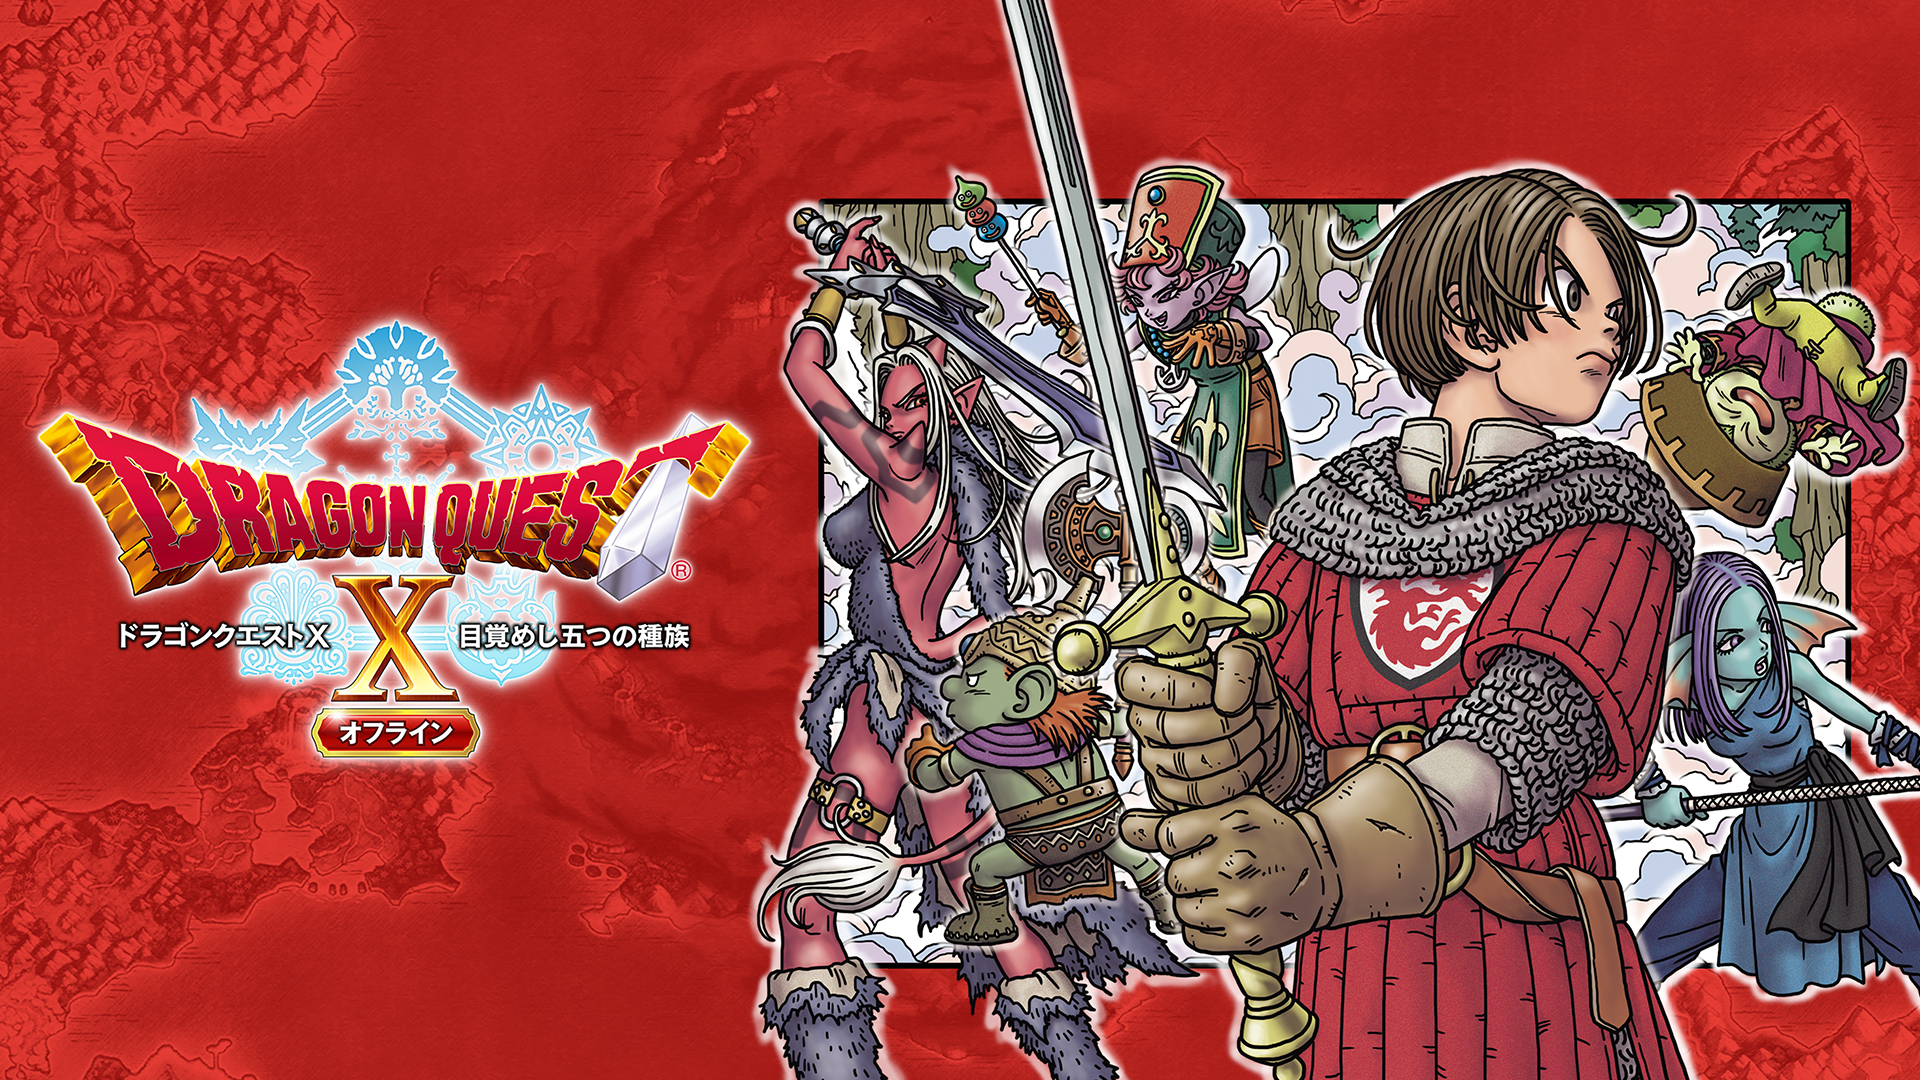 Dragon Quest: The 10 Best Games In The Series, According To Metacritic